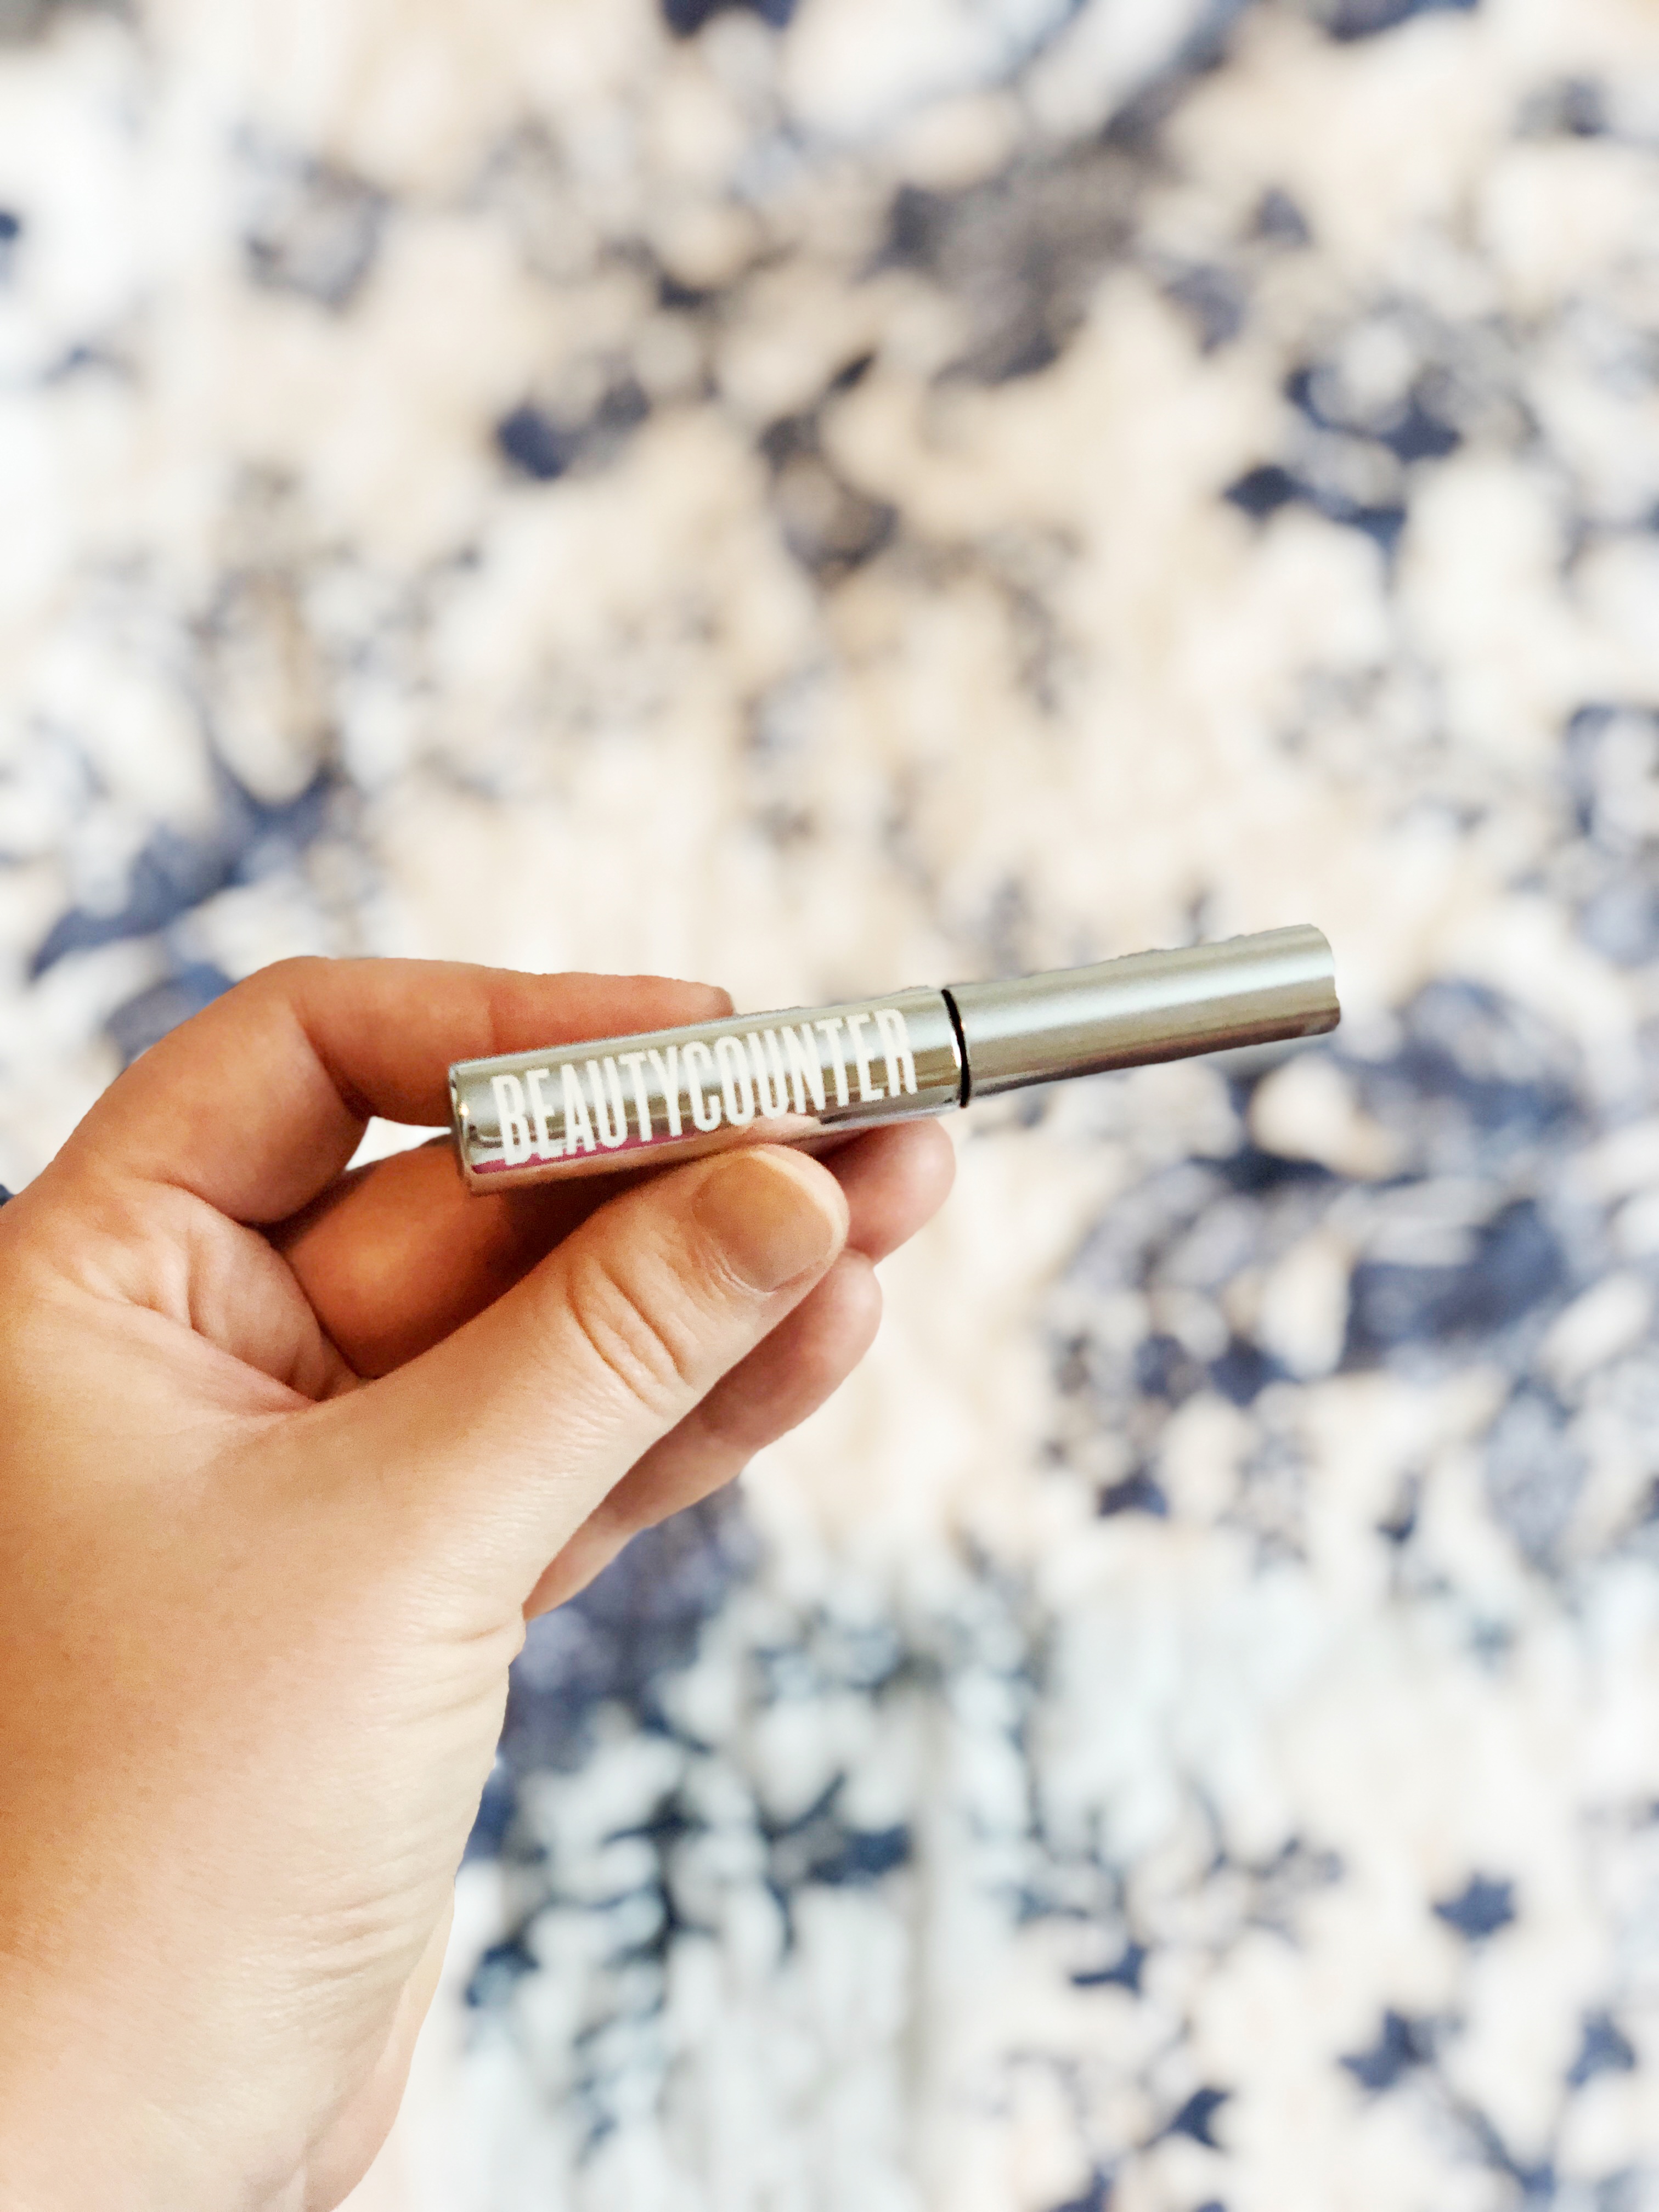 Beautycounter Brilliant Brow Gel Review - DC Girl in Pearls #beautycounter #brows #browgel